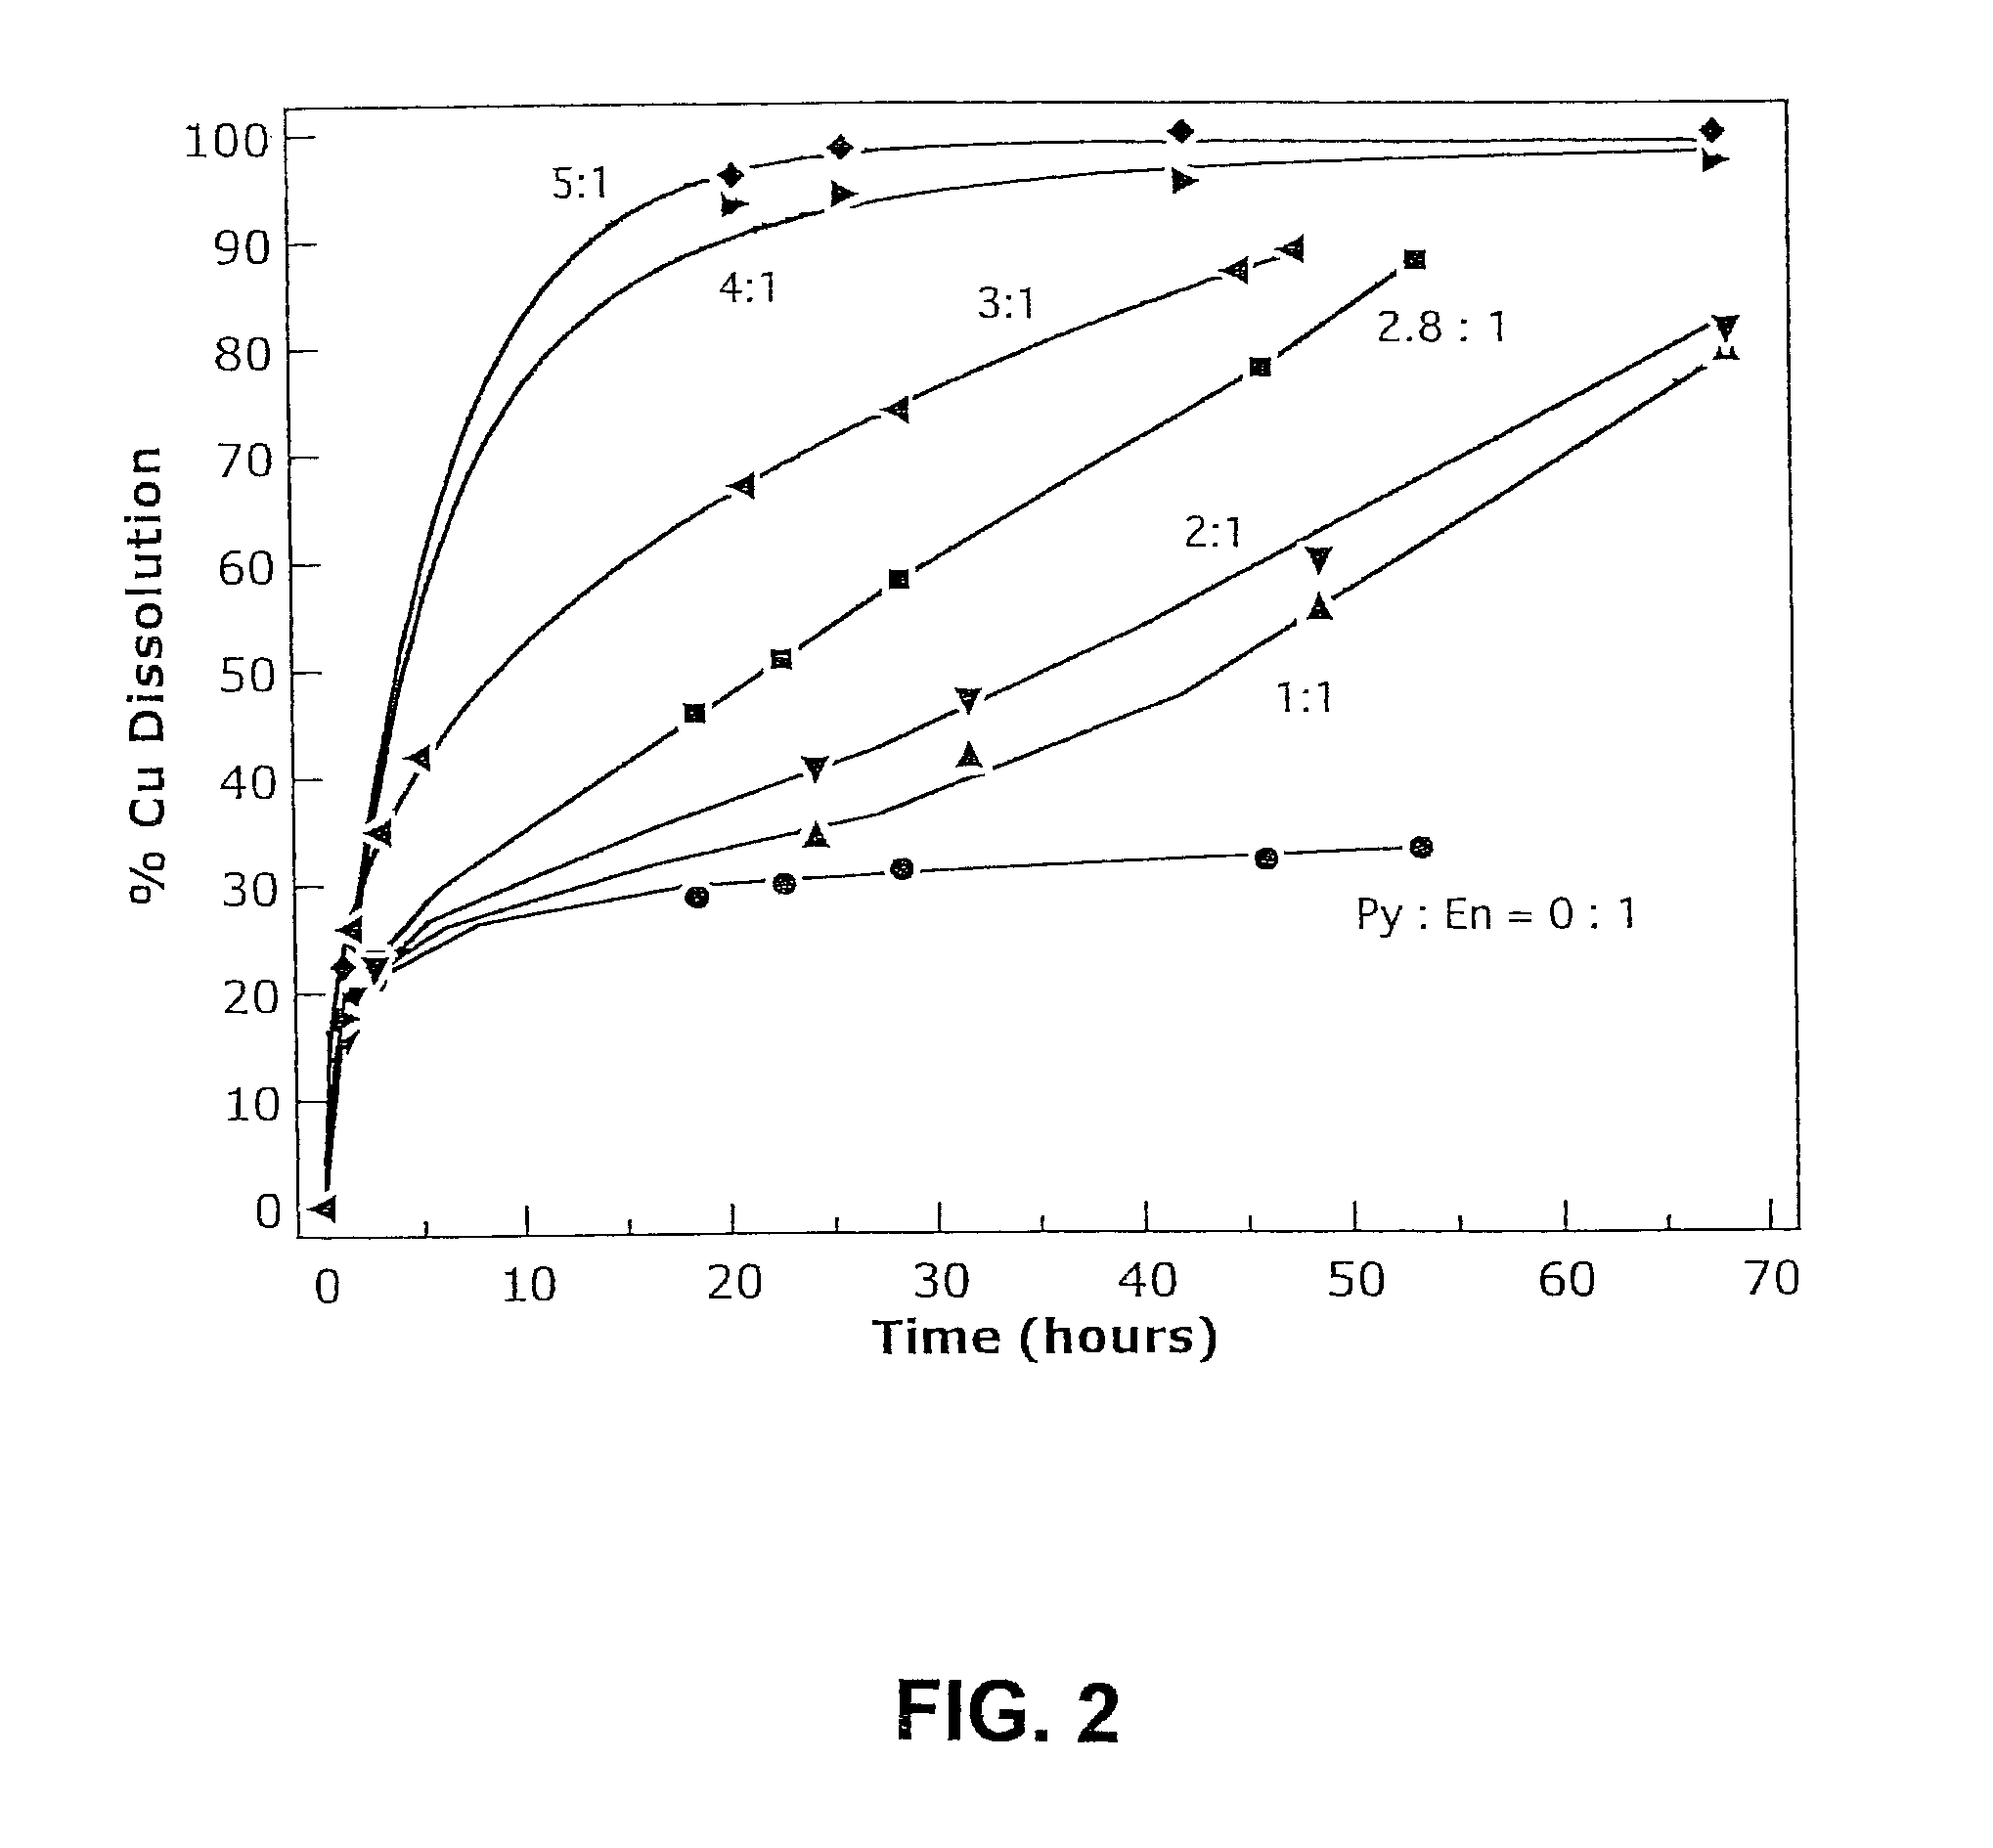 Leaching process for copper concentrates containing arsenic and antimony compounds